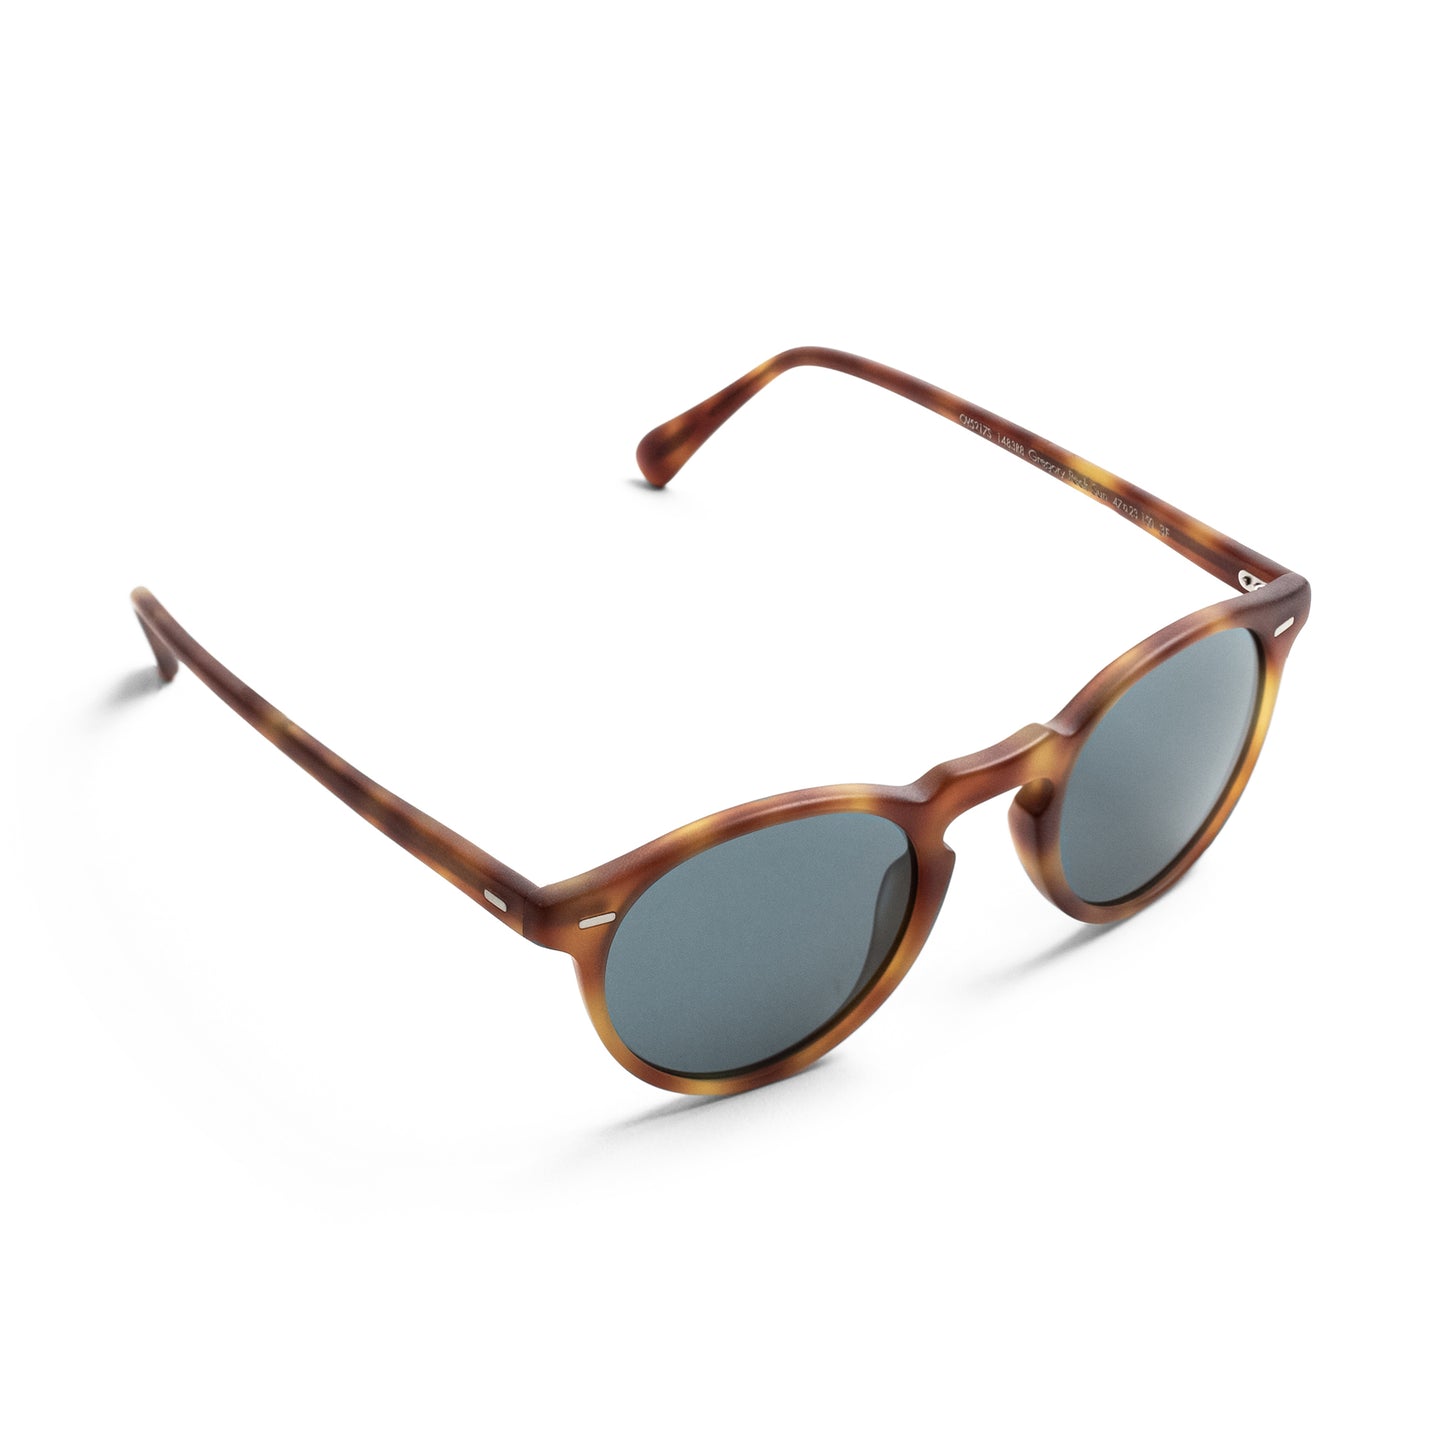 Oliver Peoples x Gregory Peck Sunglasses